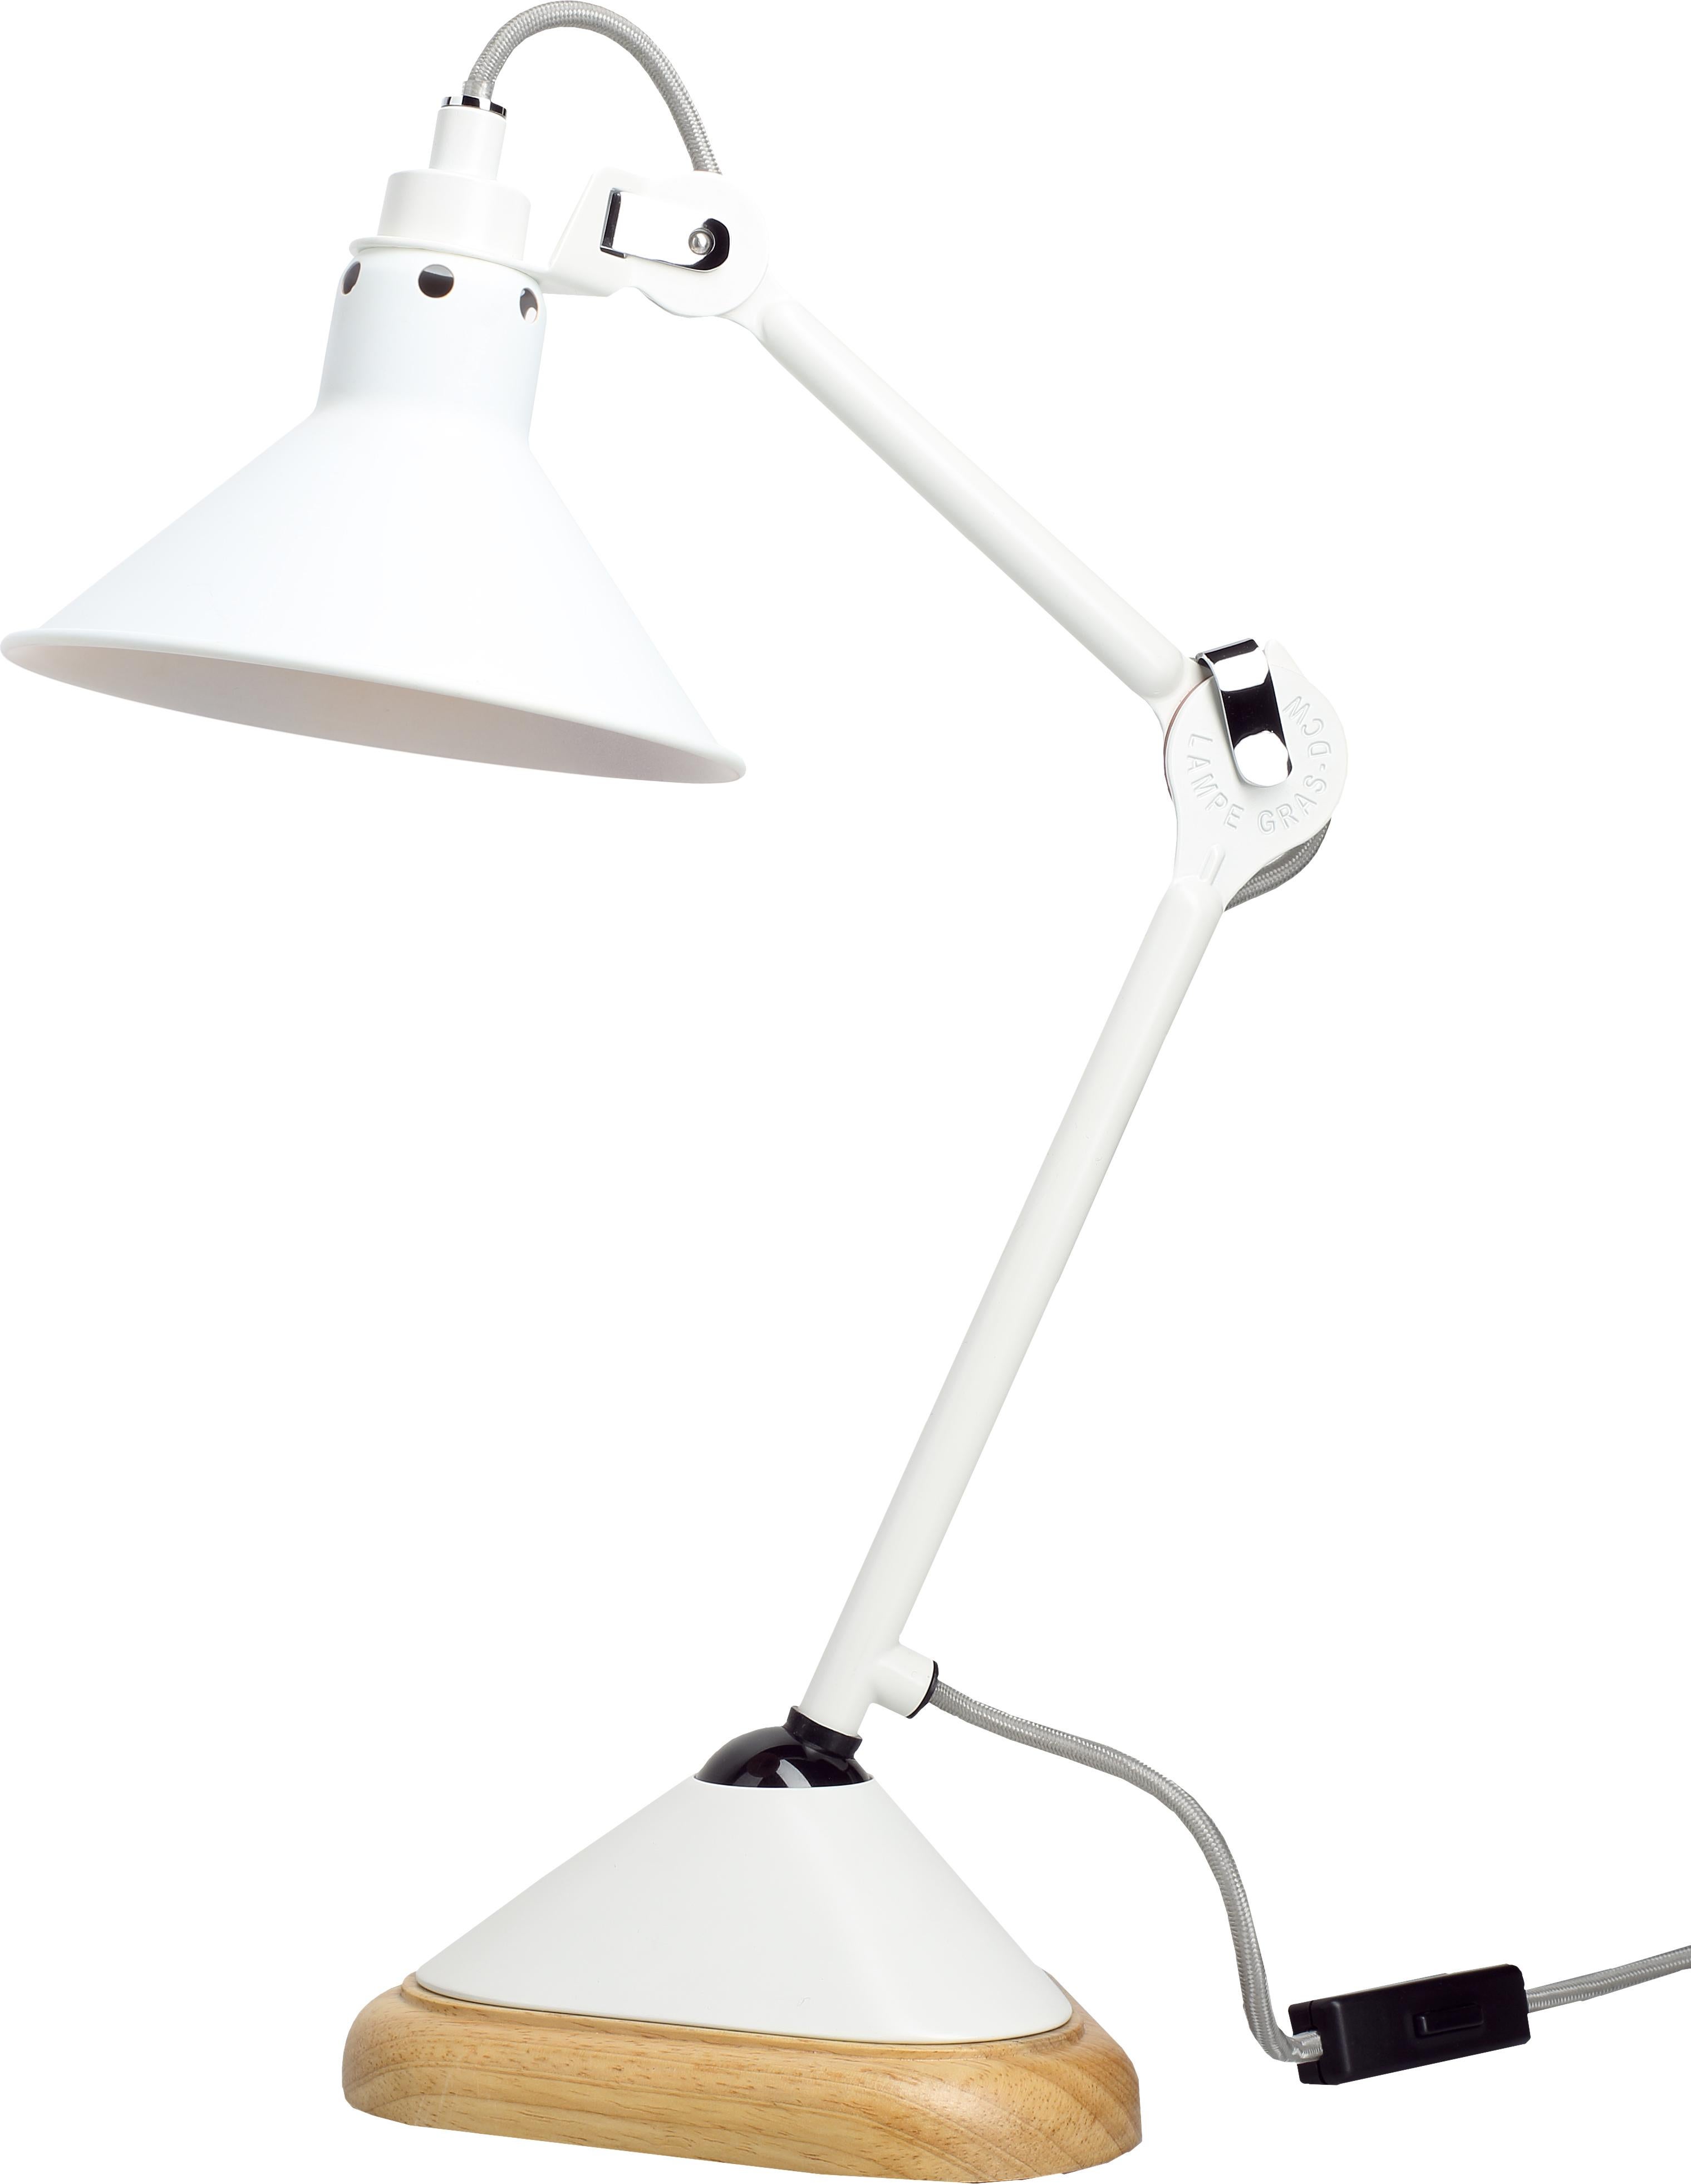 DCW Editions La Lampe Gras N°207 Conic Table Lamp in White Arm with White Shade